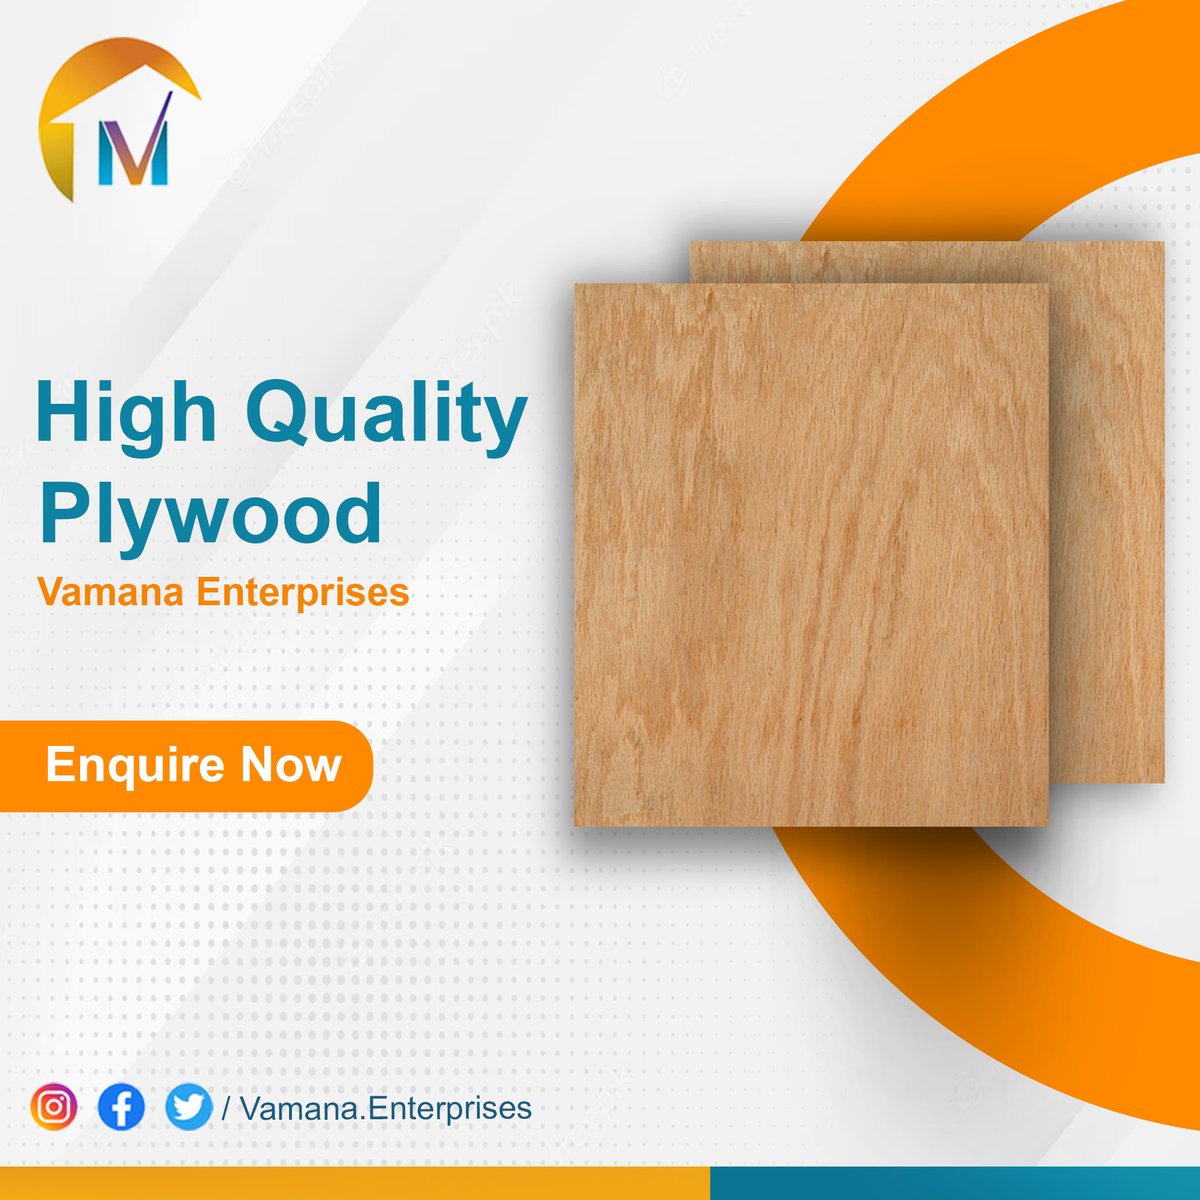 Strong, versatile, and reliable plywood for all your Dream home needs-Vamana Enterprises
#dreamhomedecor #furniture #plywoodproject  #plywoodmanufacturer #HighQualityWood #qualityplywoodindia